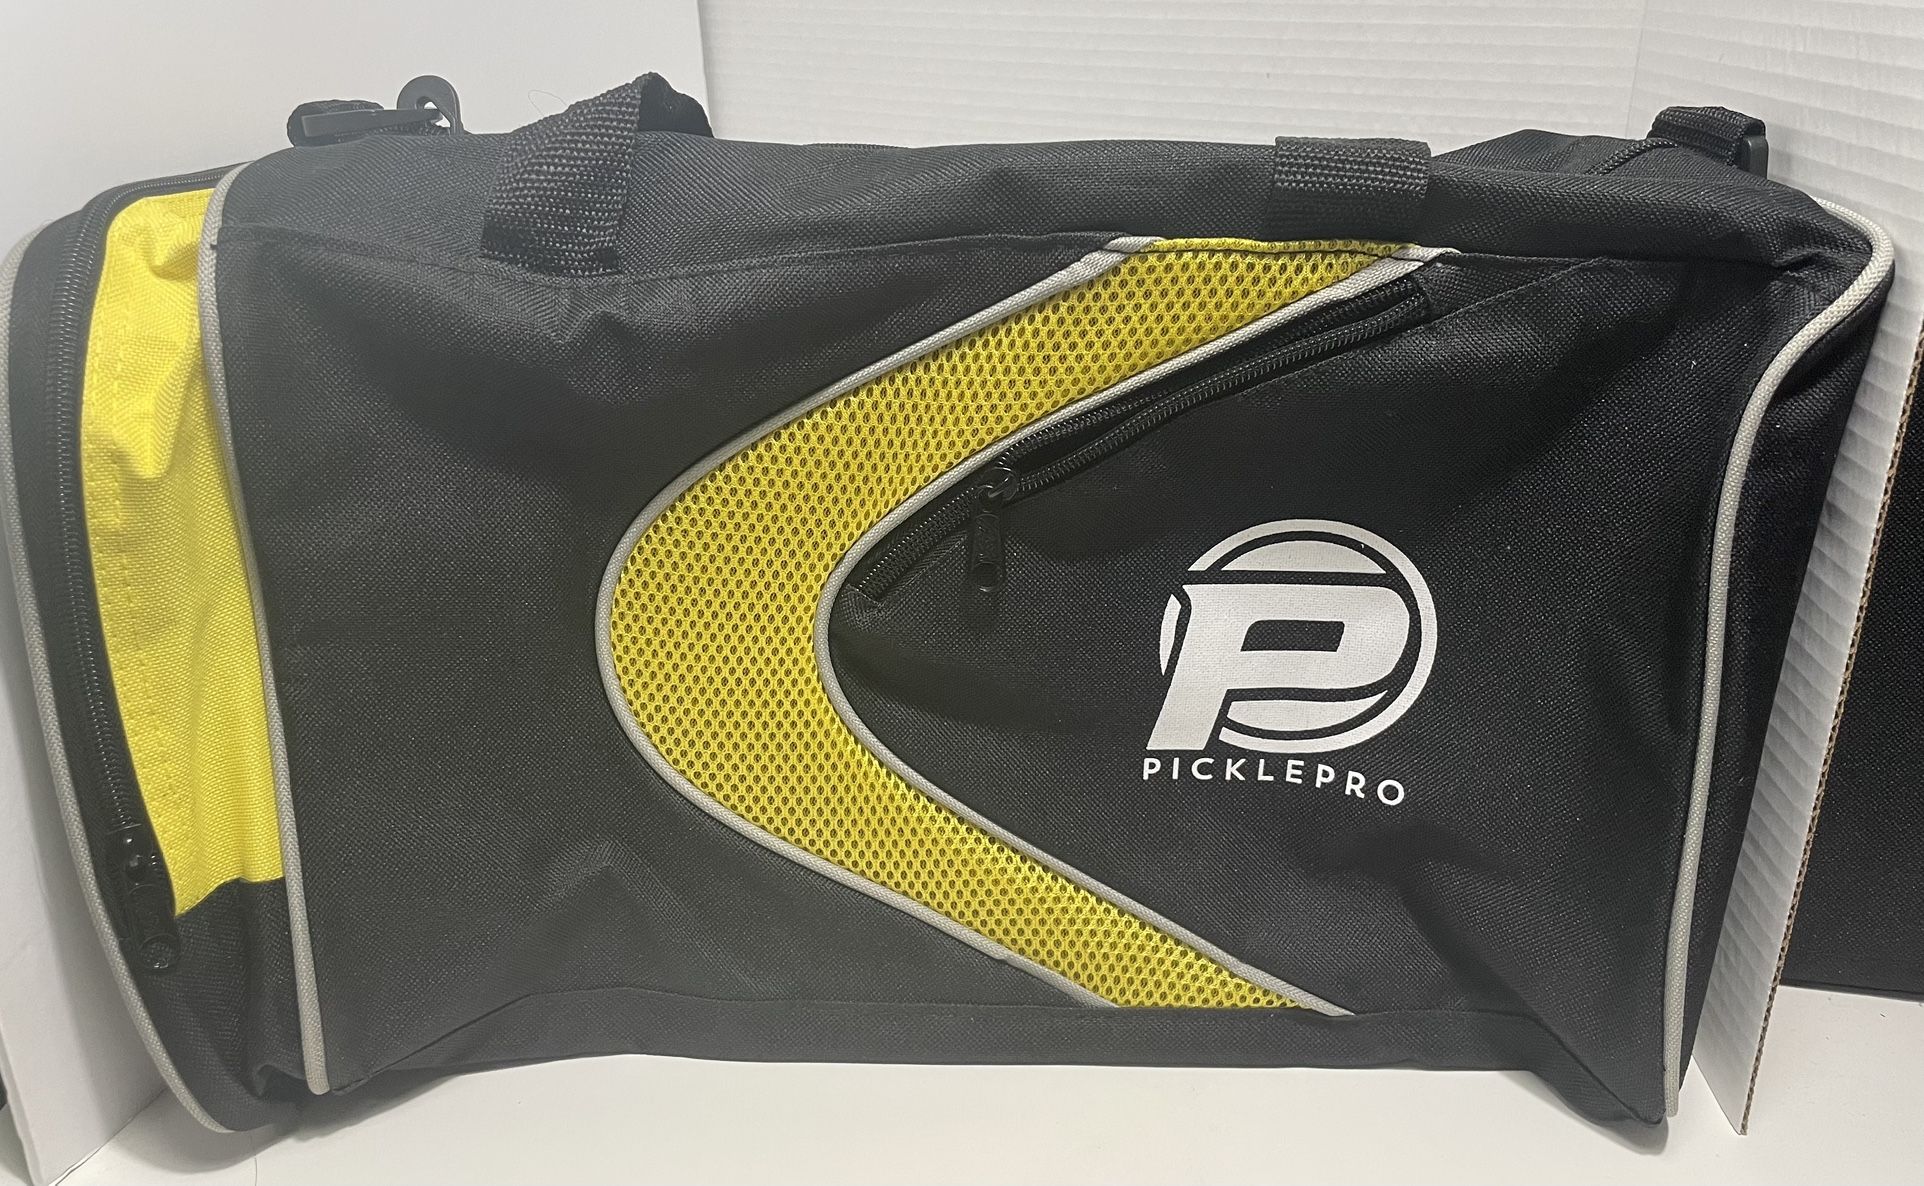 PICKLEPRO Pickleball Promotional Duffle Bag Black & Yellow Reflective Gym Sports